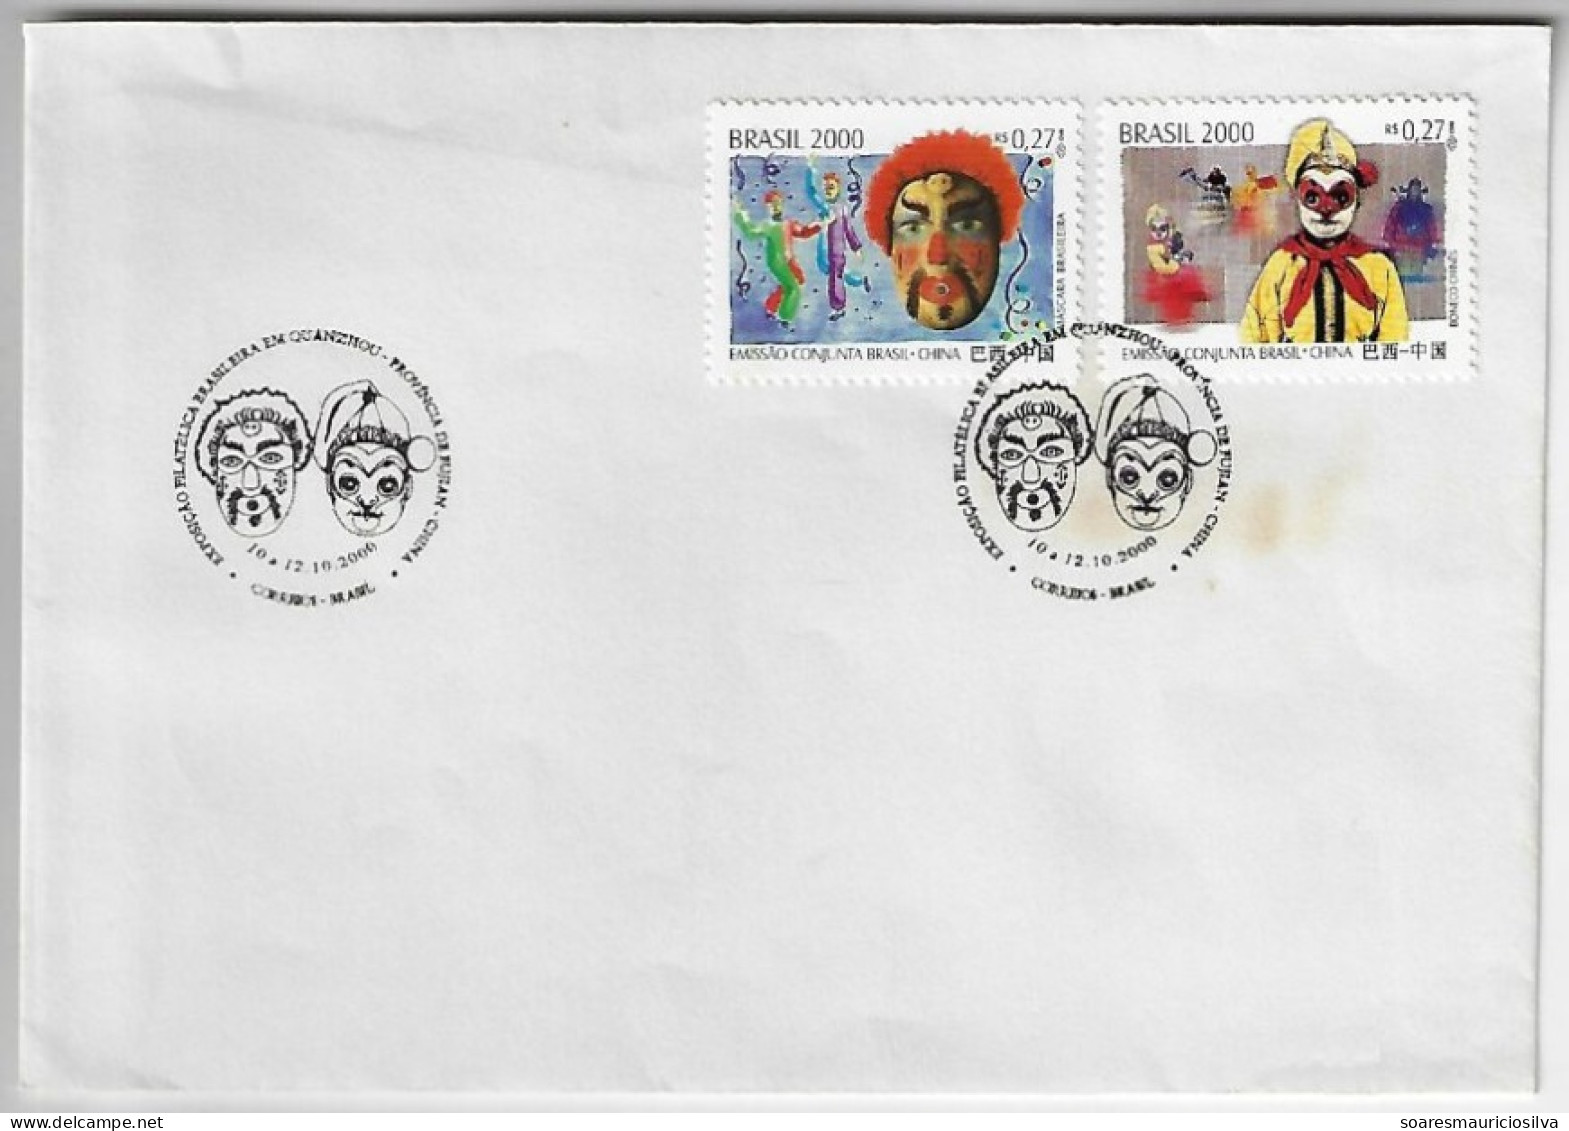 2000 2 Cover Stamp Joint Issue Brazil China 25 Years Diplomatic Relations Between Countries Brazilian Mask Chinese Doll - Lettres & Documents